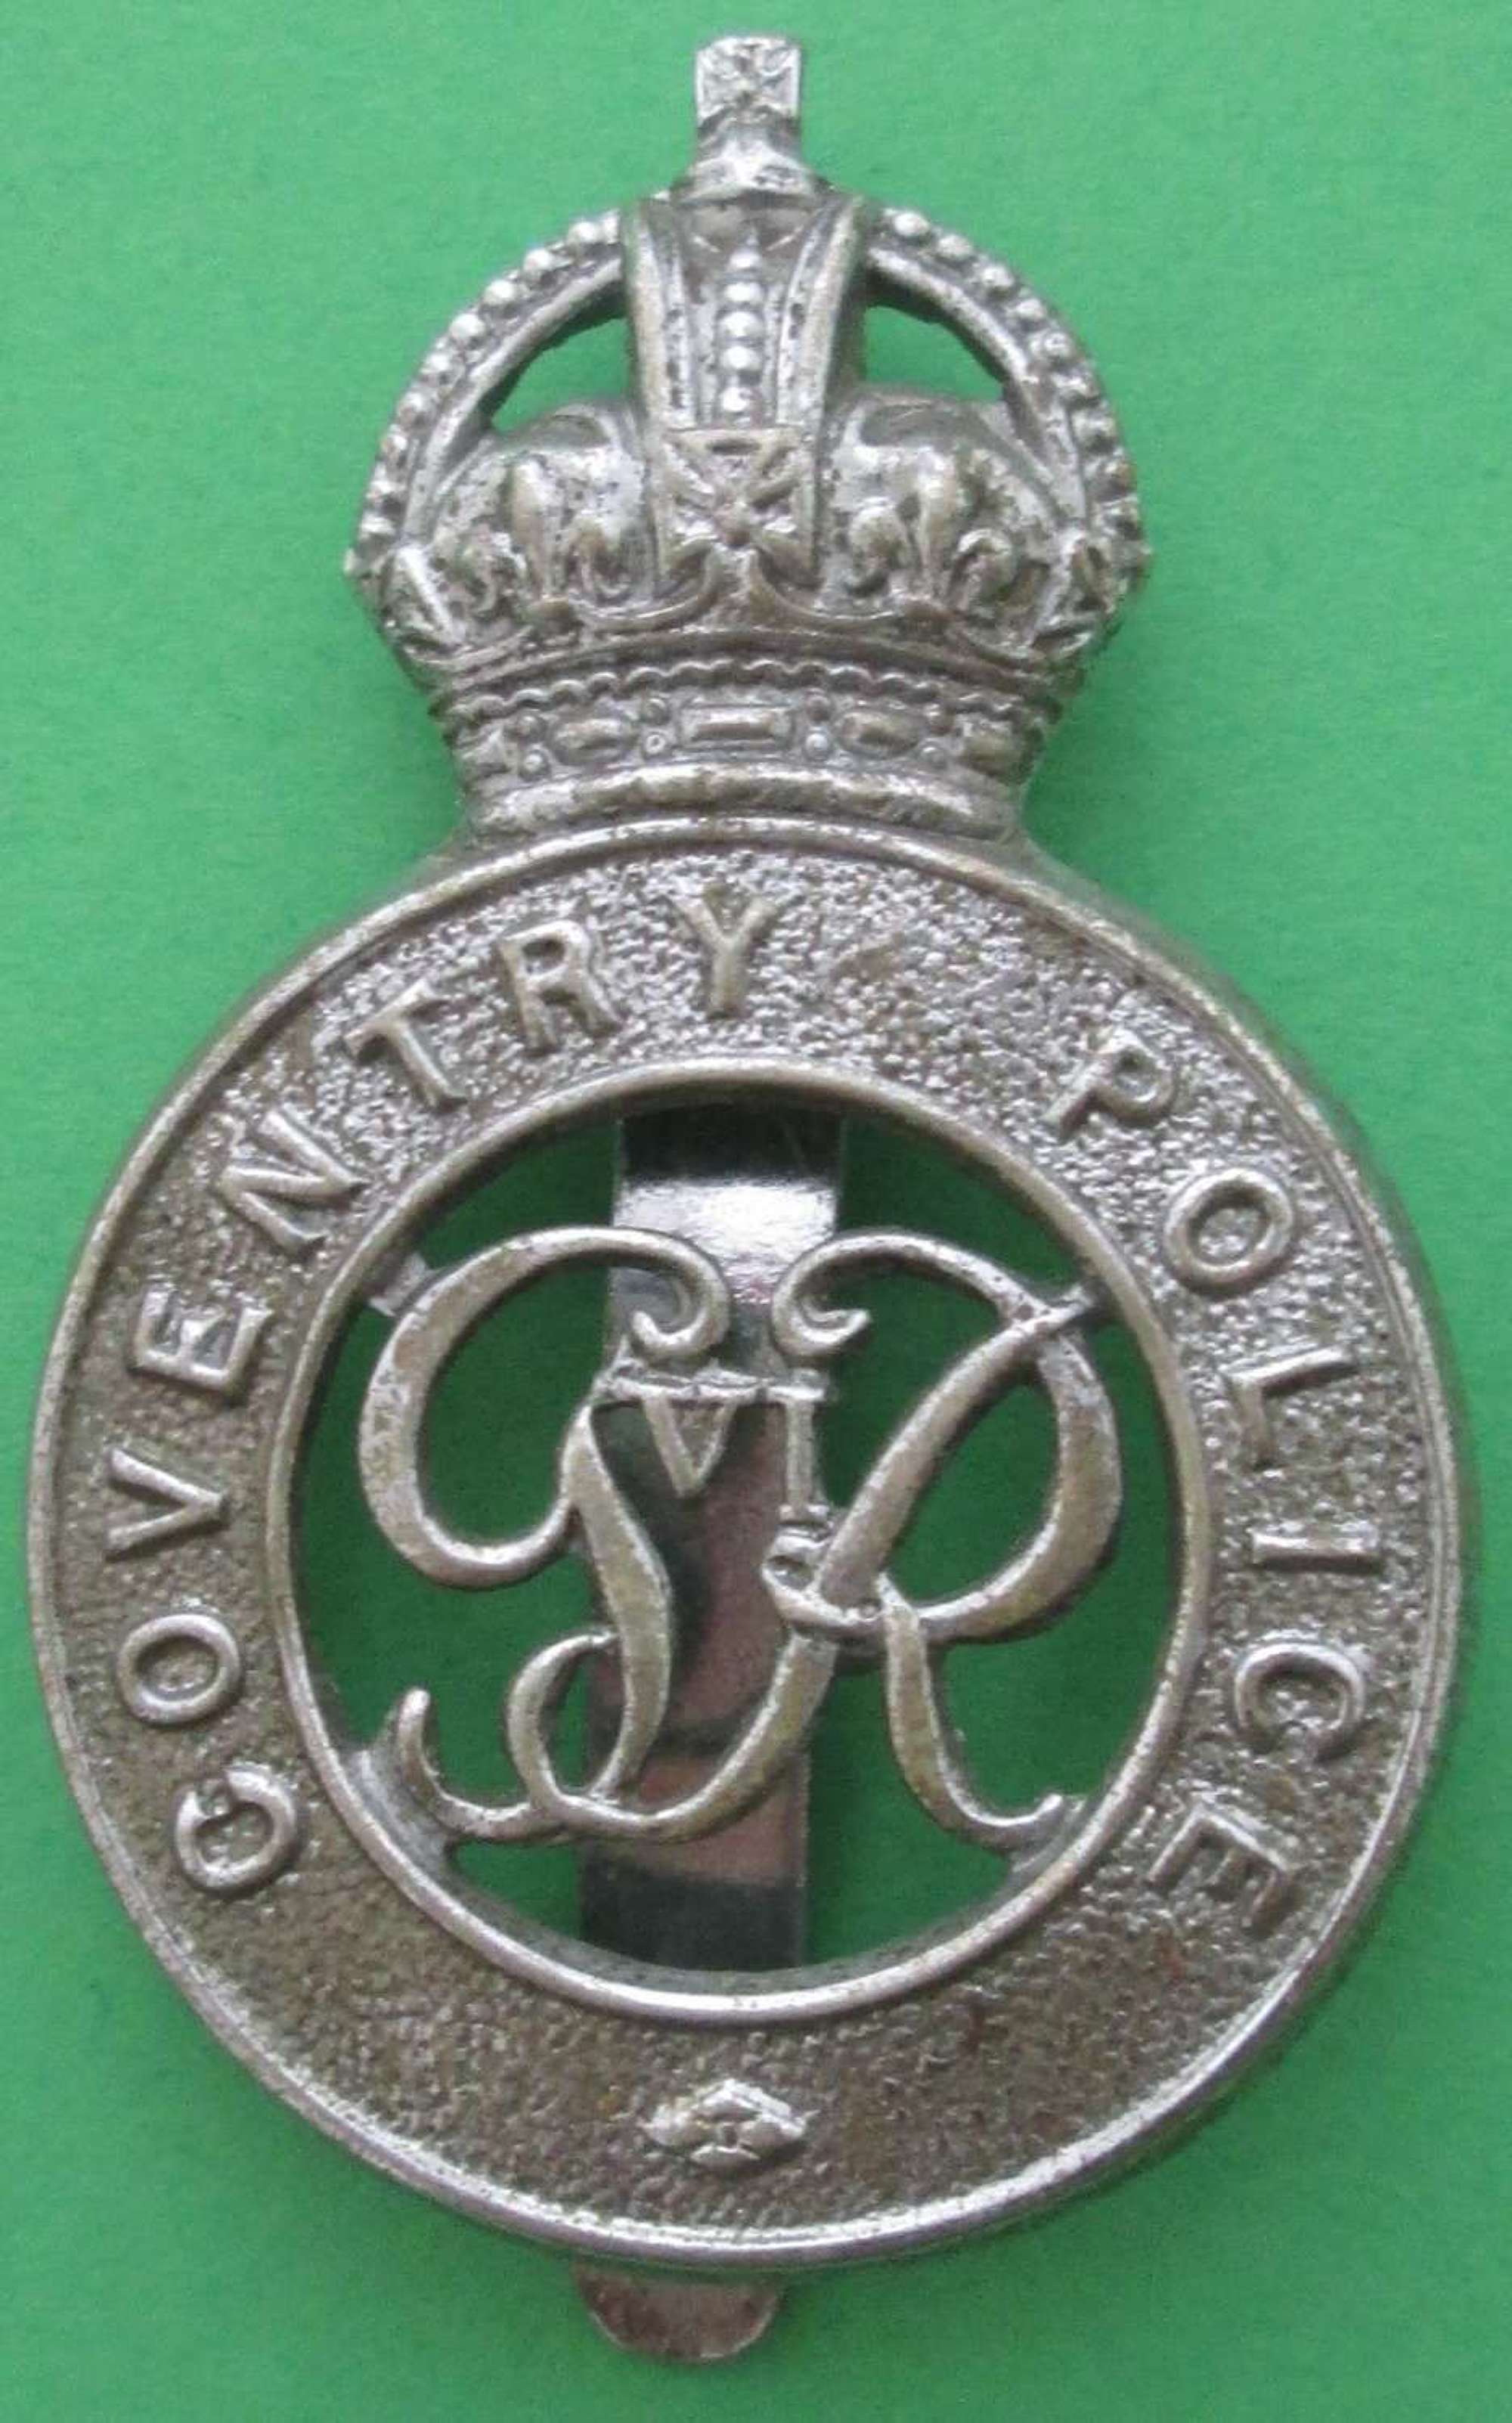 A COVENTRY POLICE CAP BADGE